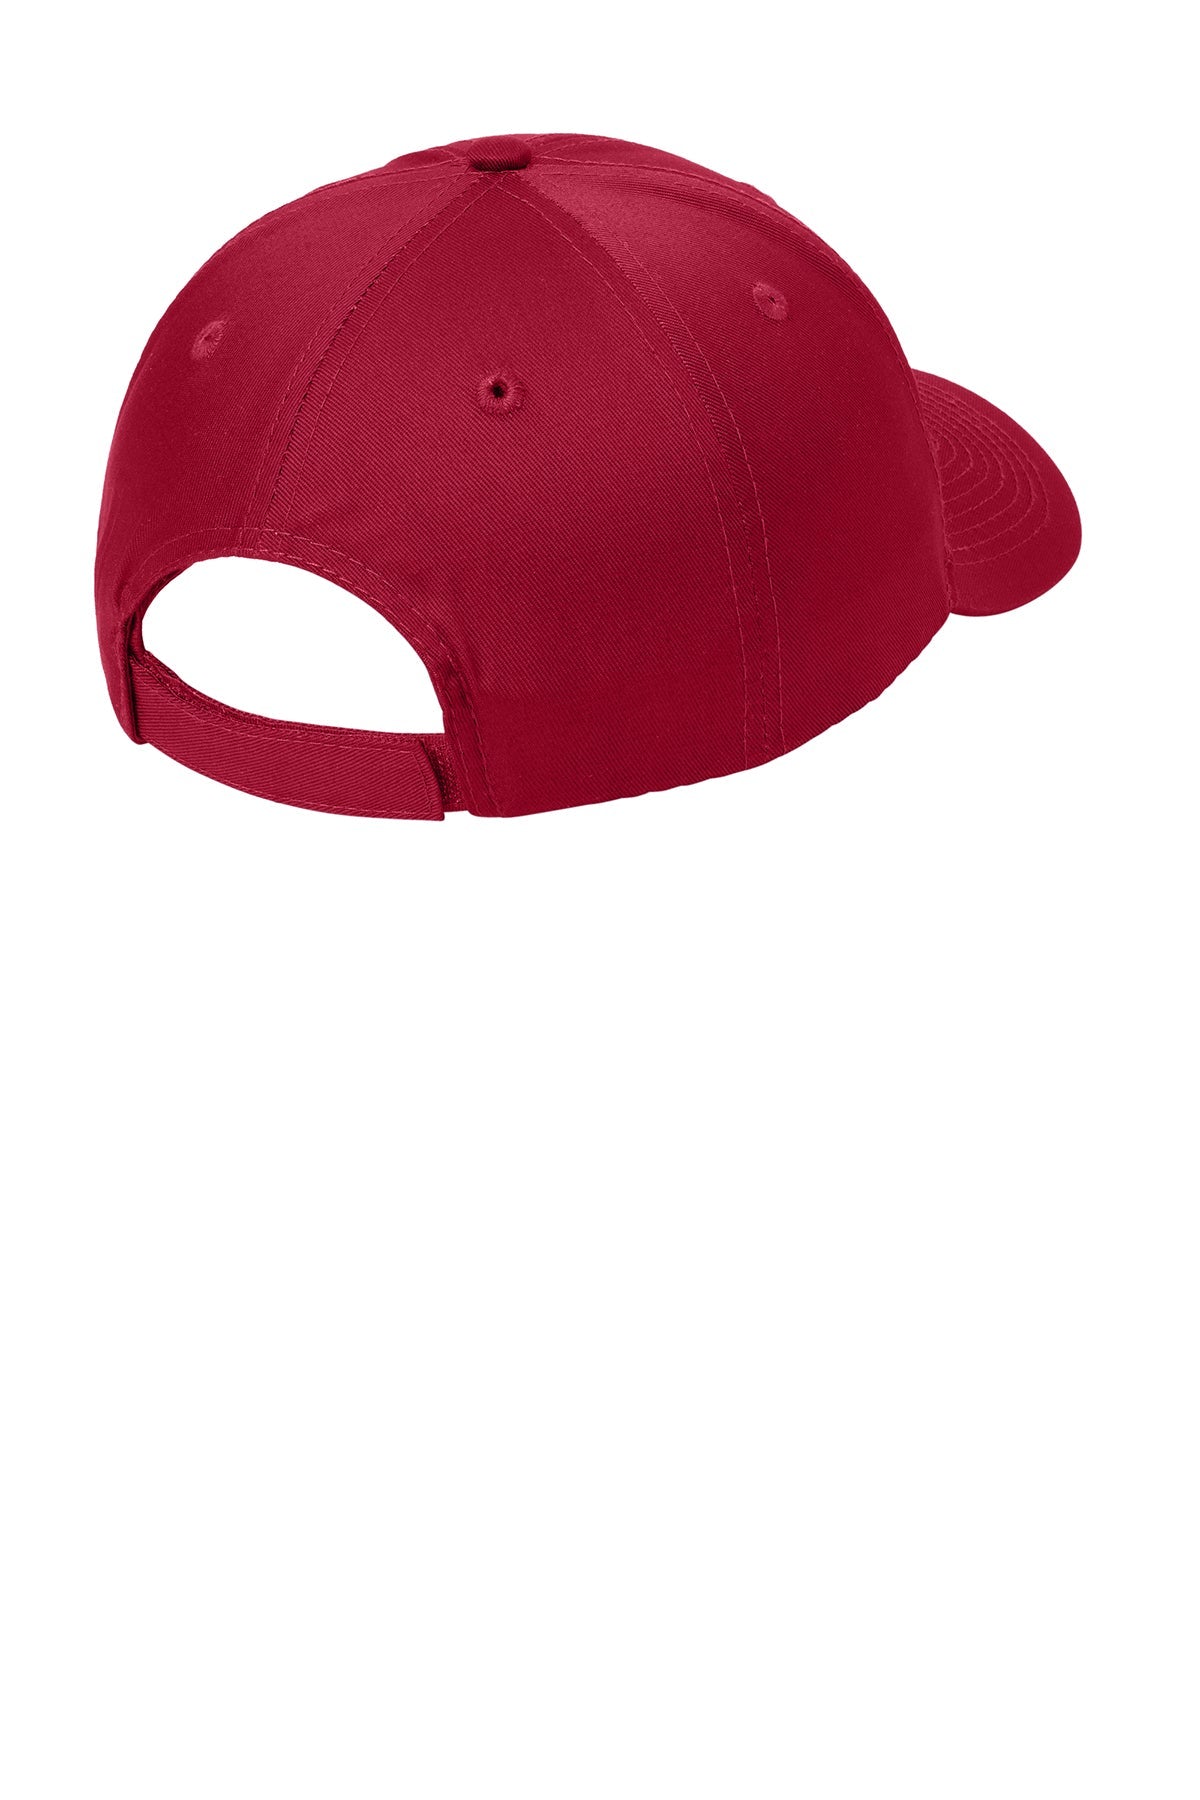 Port Authority Uniforming Branded Twill Caps, Red